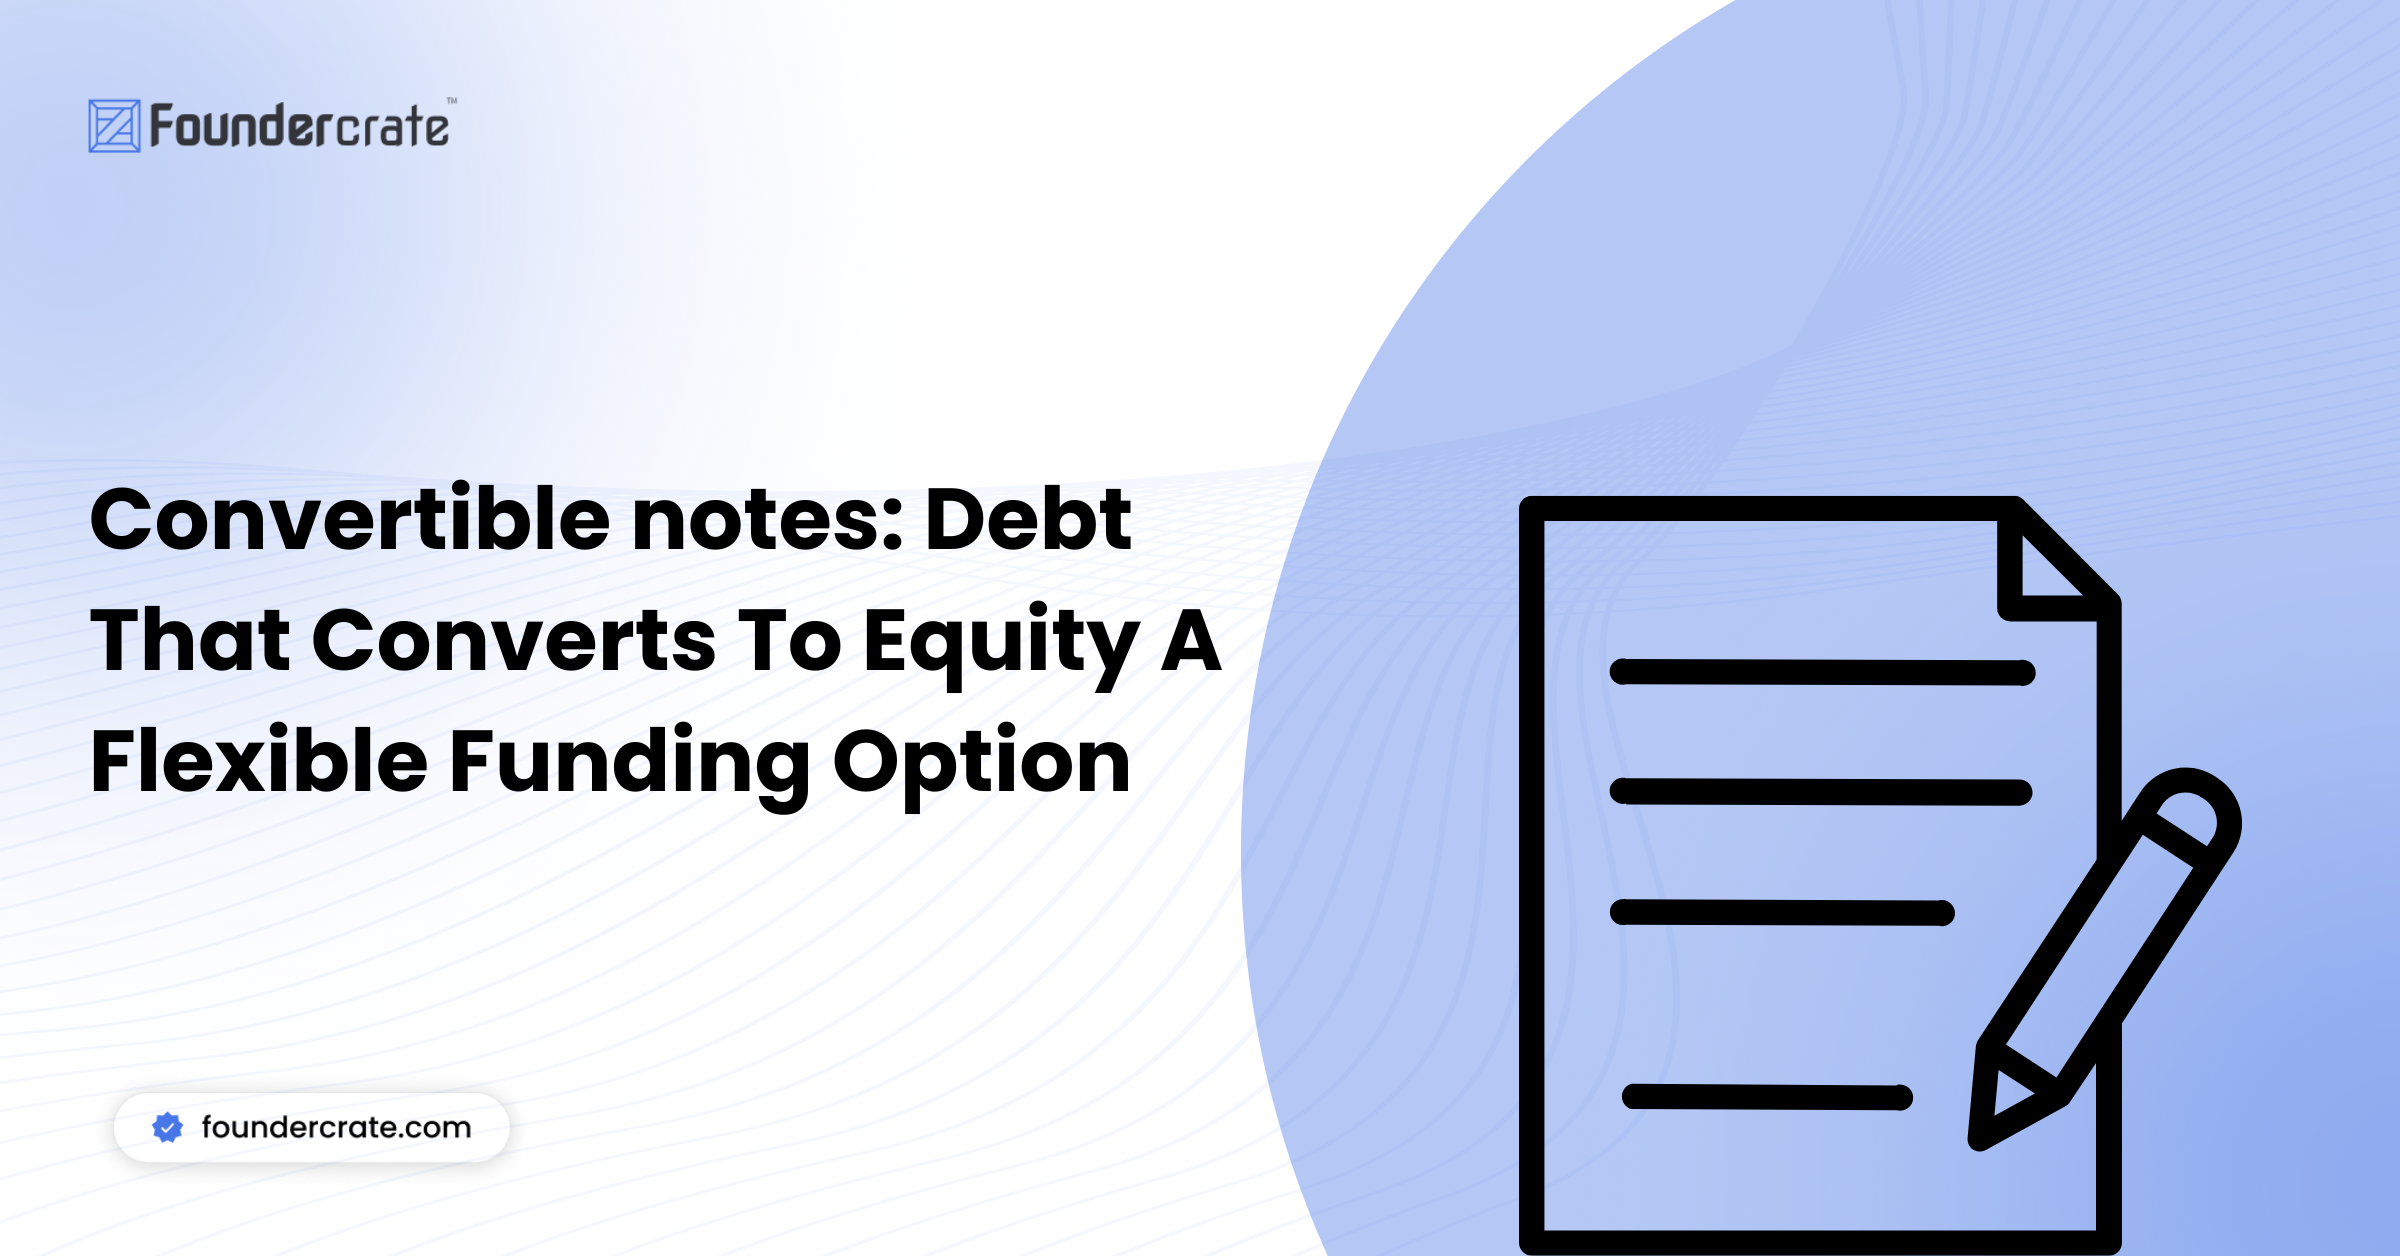 Convertible notes: Debt That Converts To Equity A Flexible Funding Option